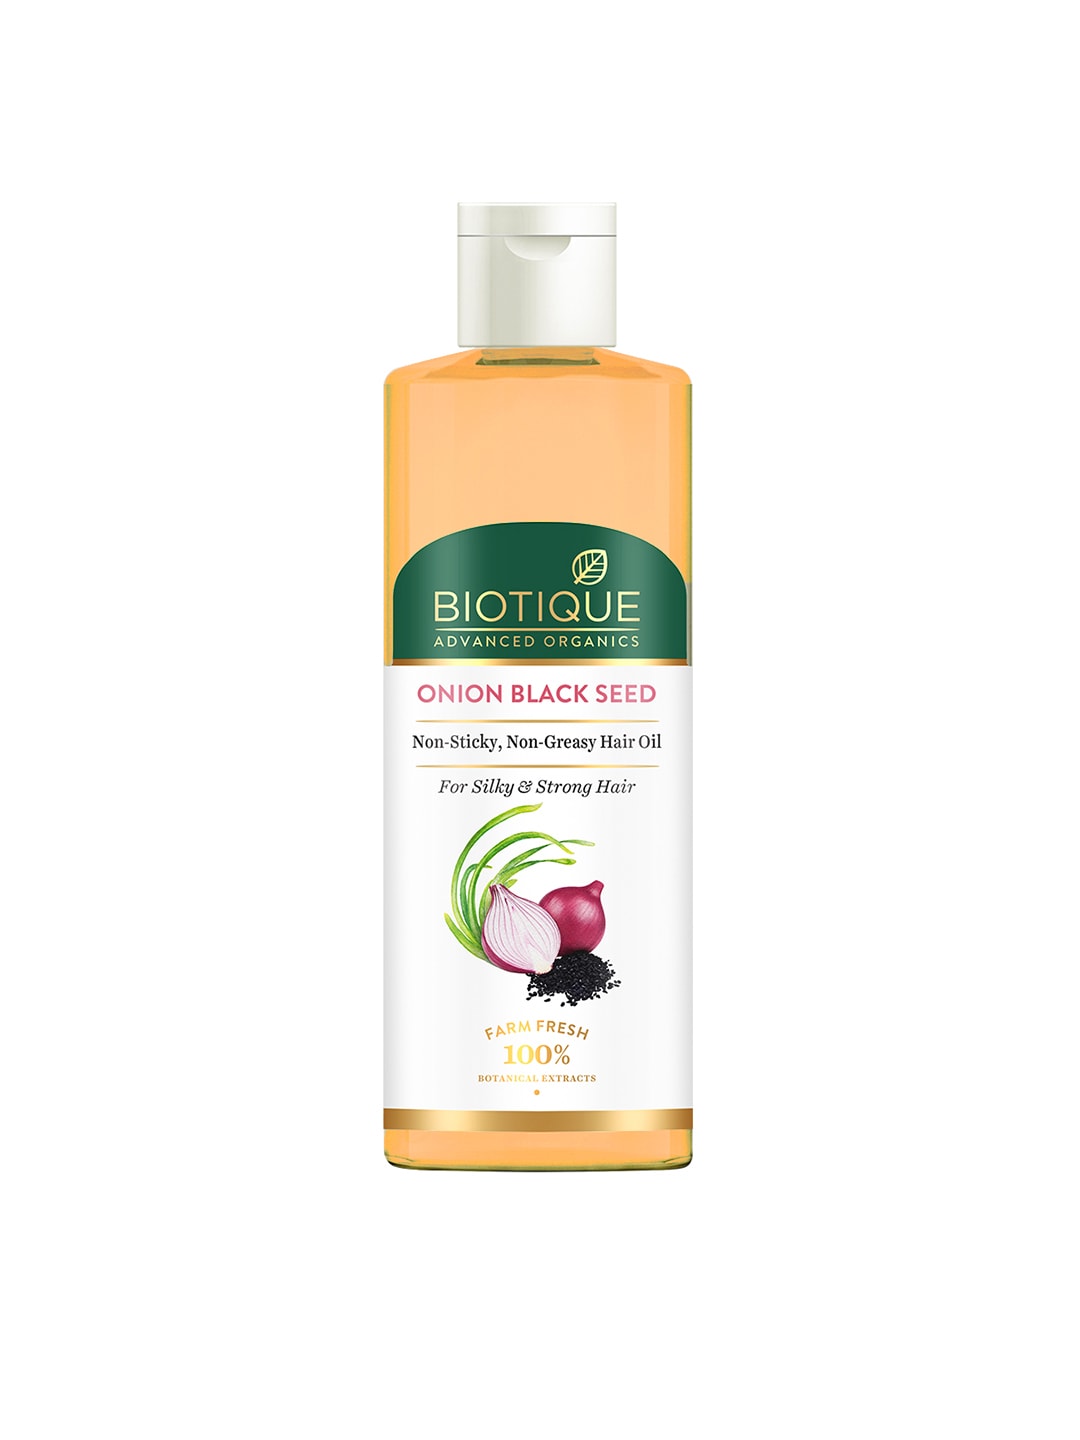 Biotique Advanced Organics Onion Black Seed Non-Sticky Hair Oil 200 ml Price  in India, Full Specifications & Offers 